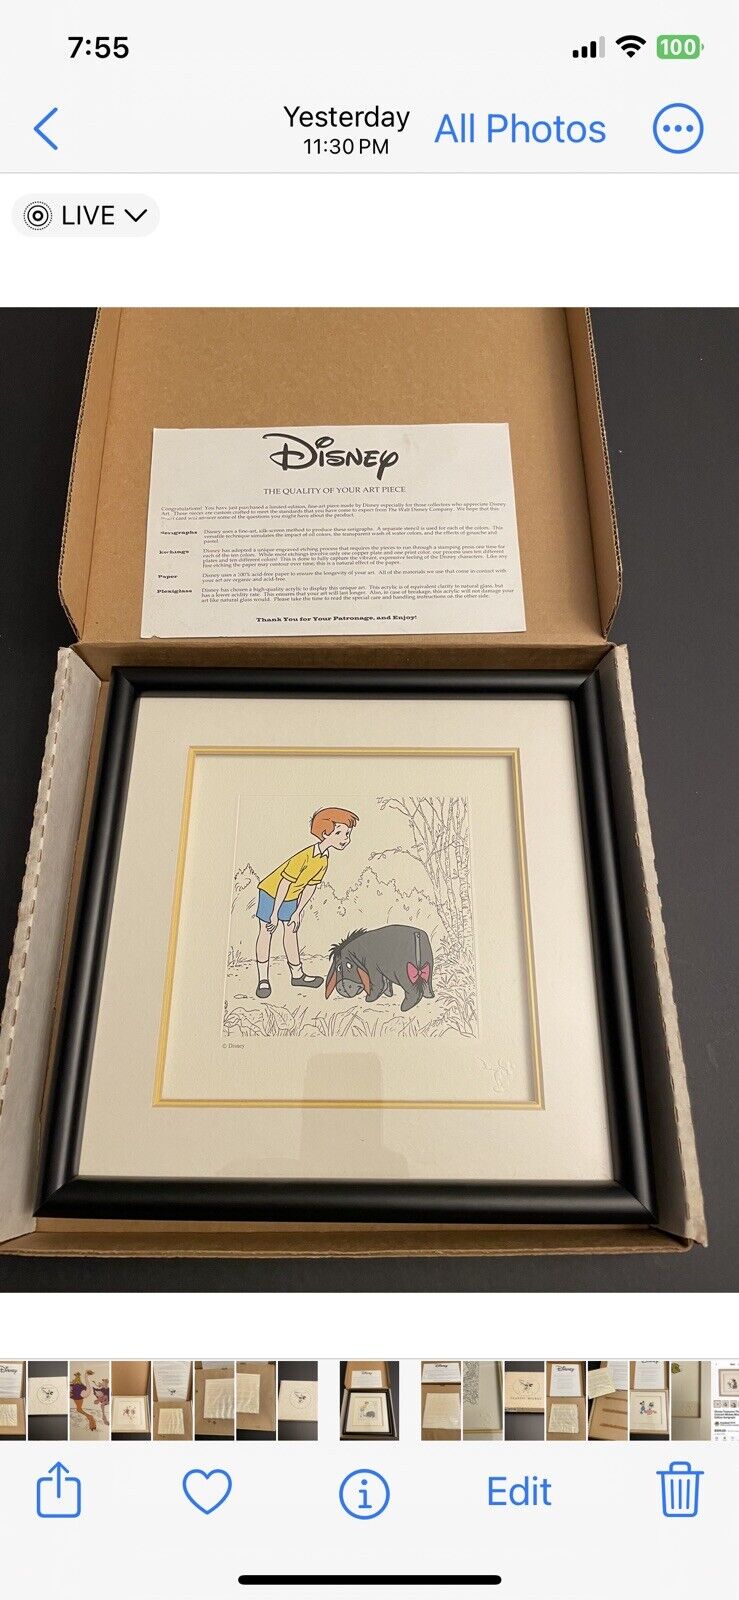 Disney sericel framed “Whinny The Pooh And The Honey Tree 1966”